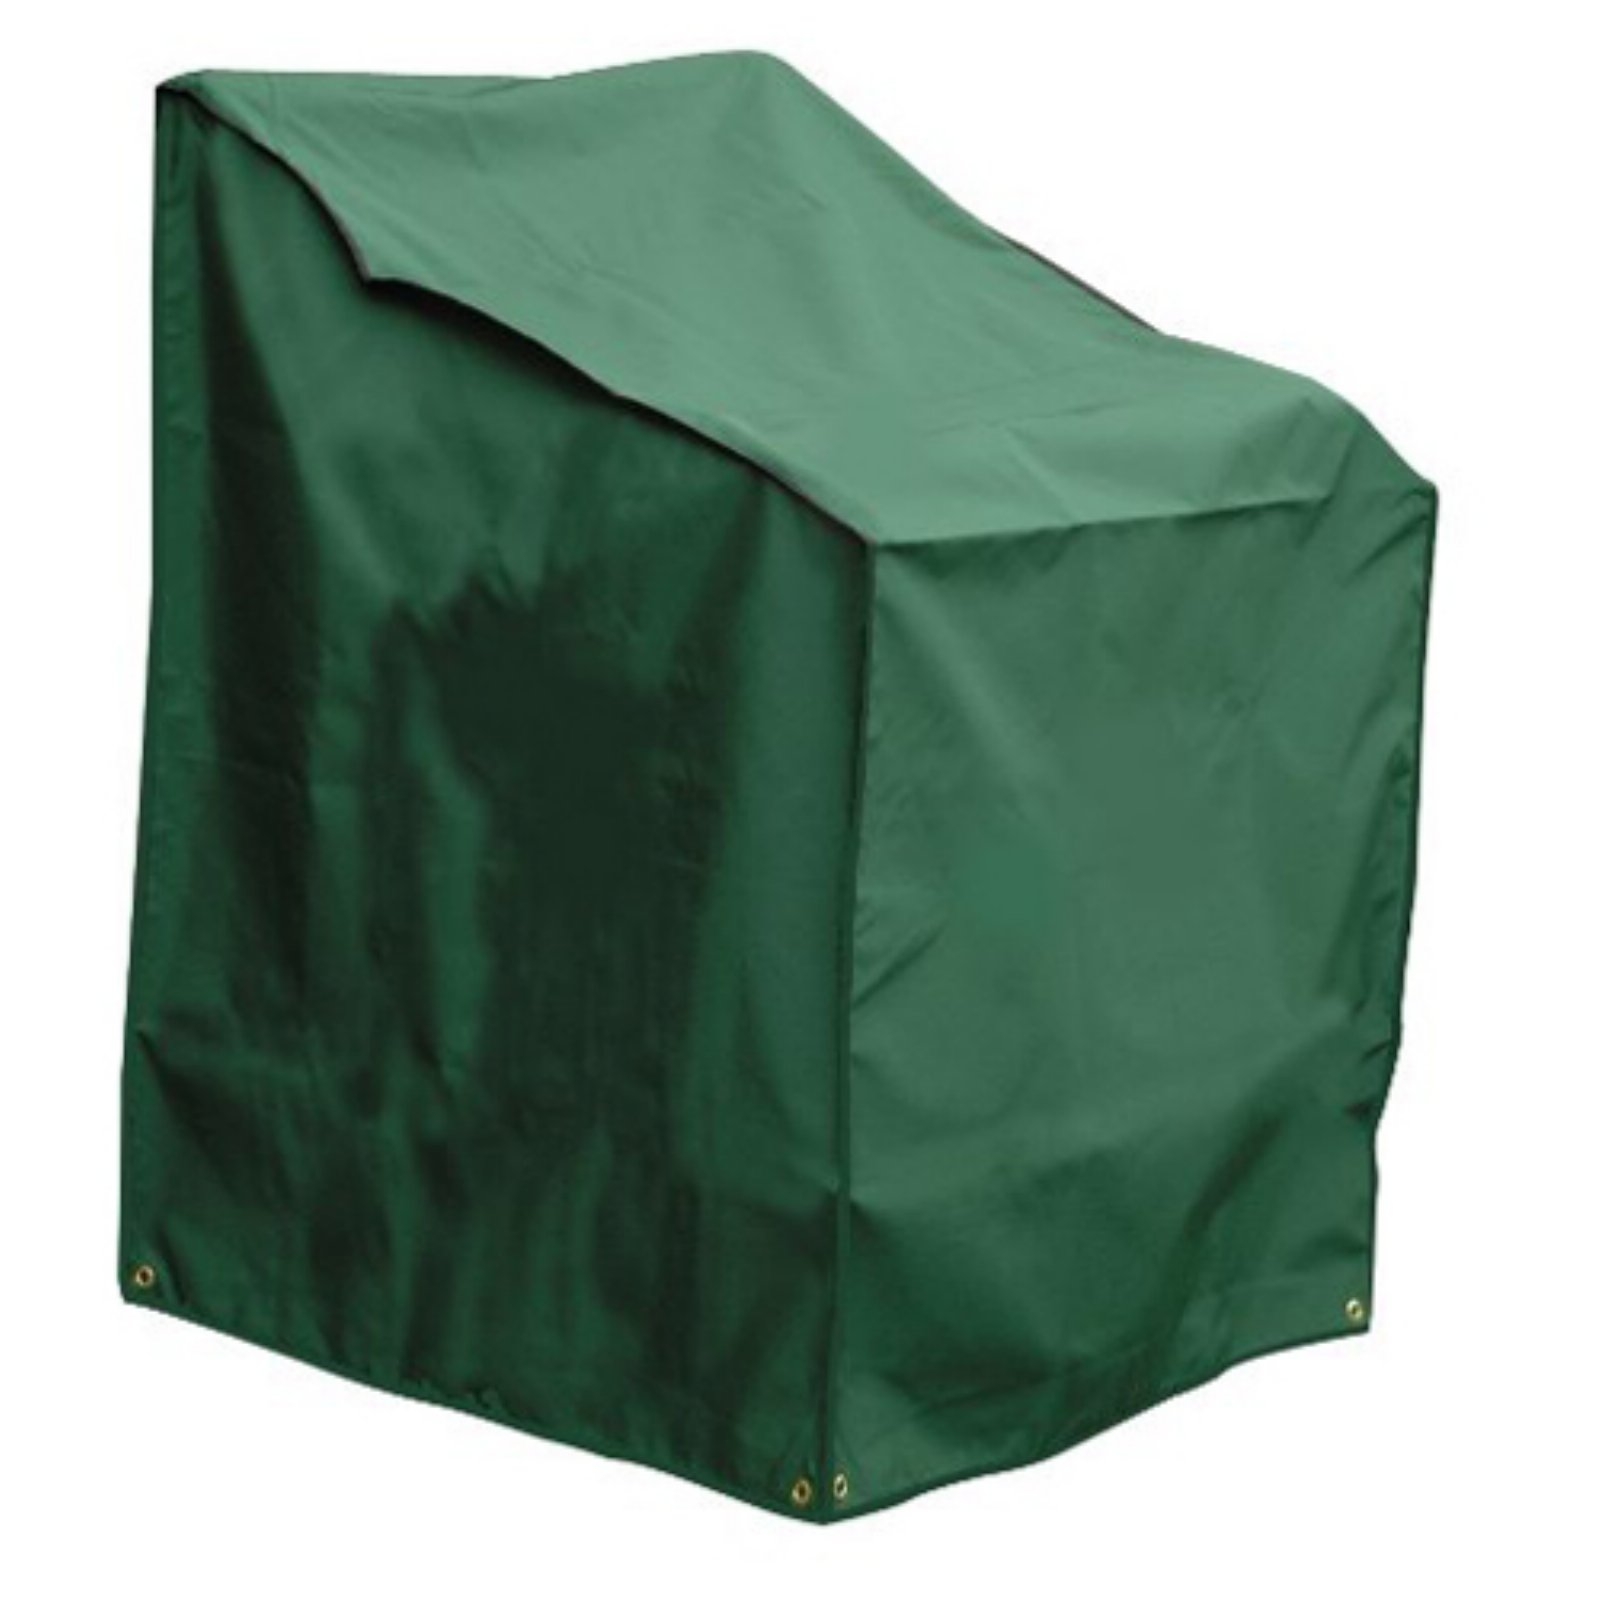 Bosmere C571 Adirondack Cover 33-Inch-Inch Wide x 41 1/2-Inch Deep x 43-Inch High at Back